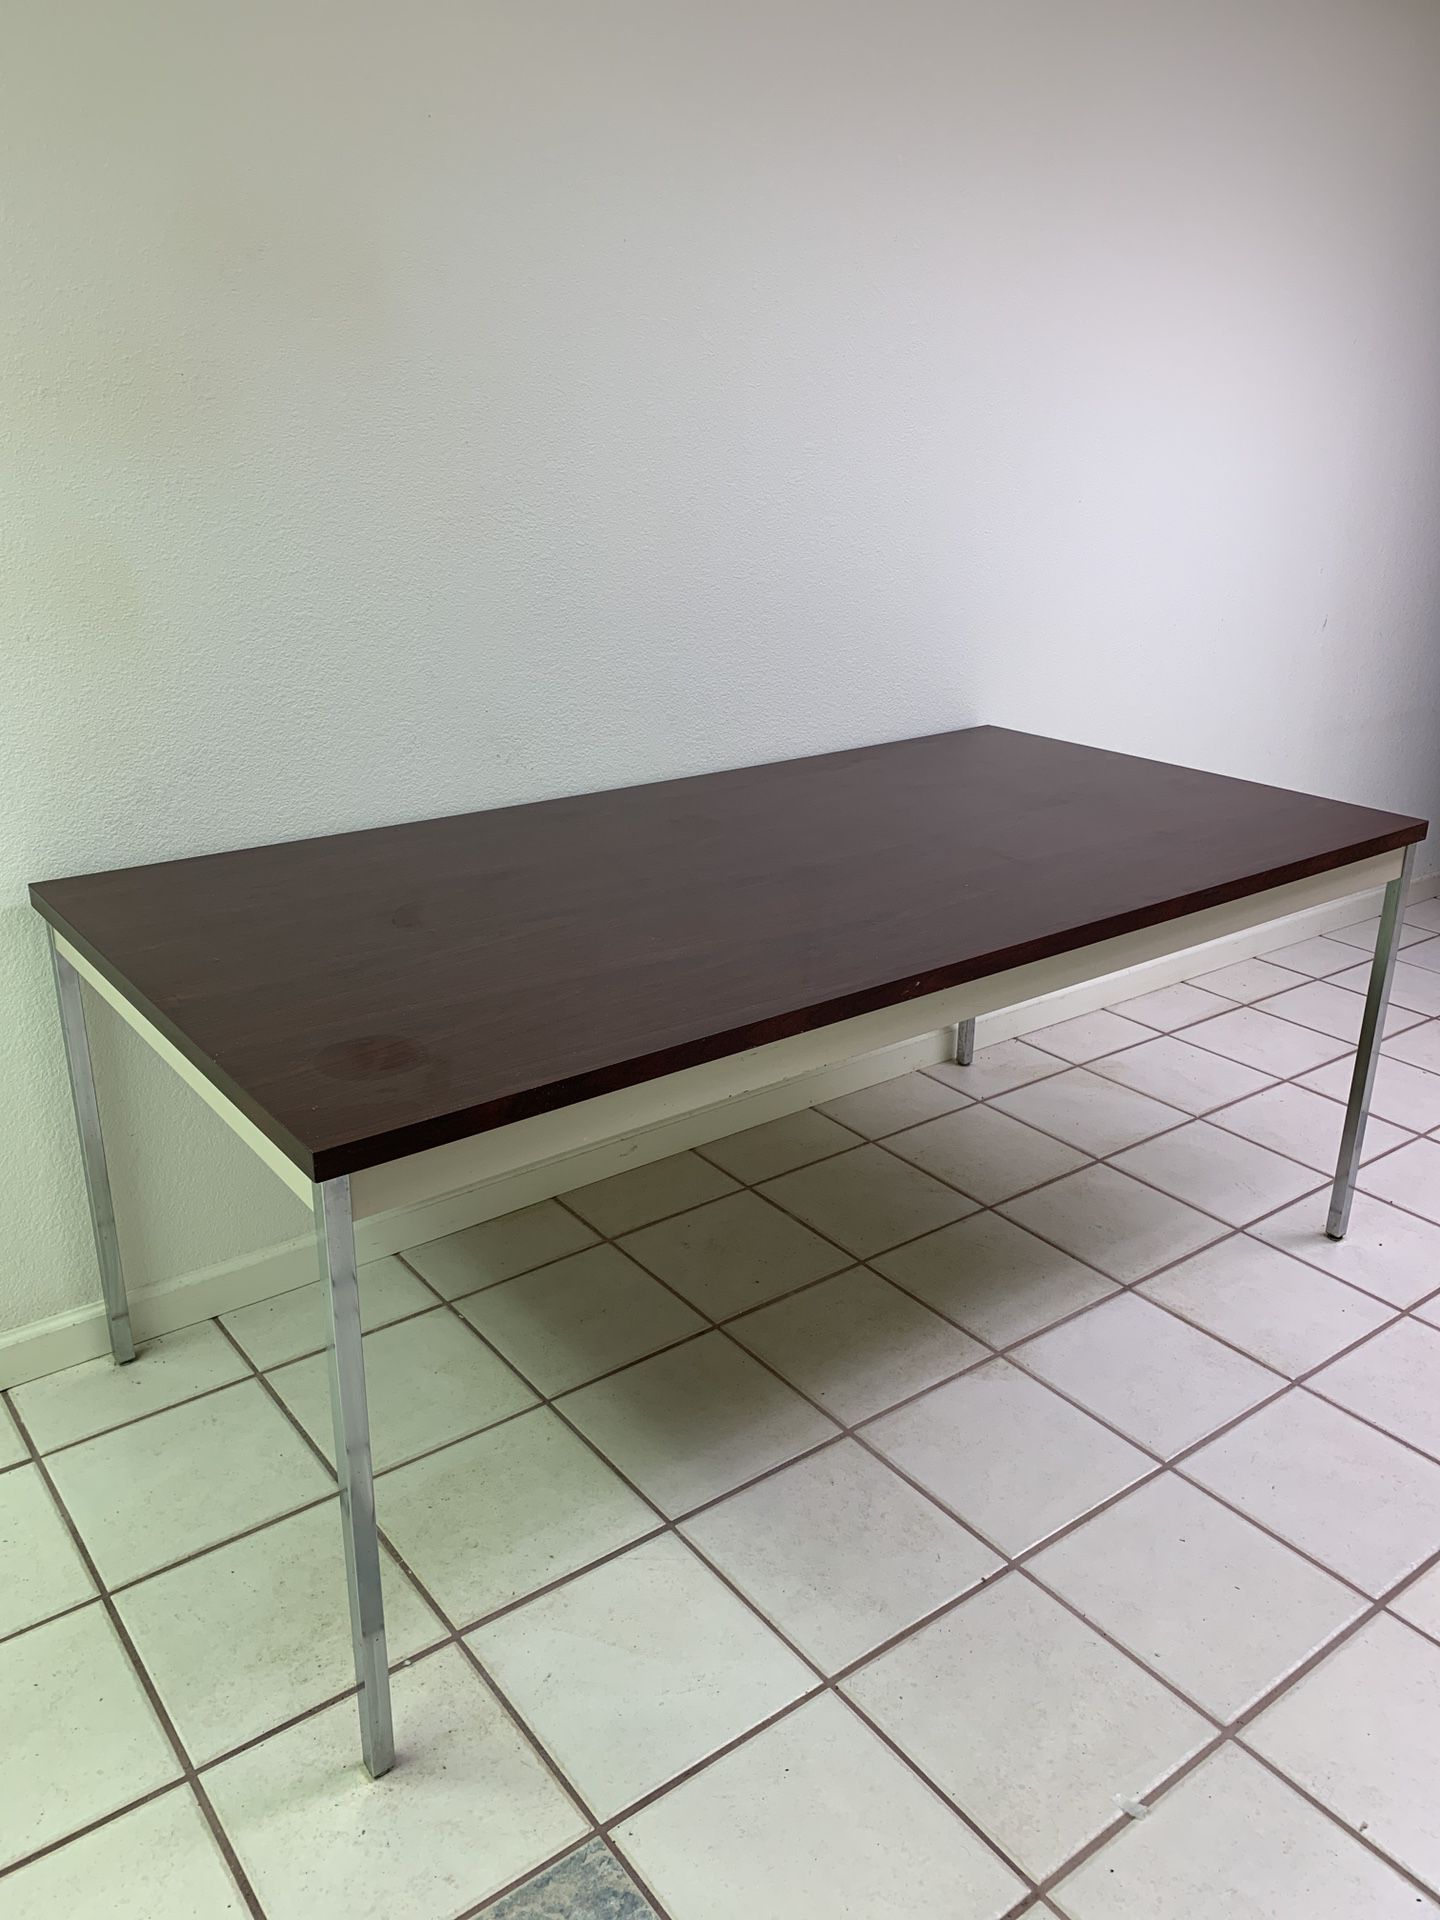 Office Meeting Table